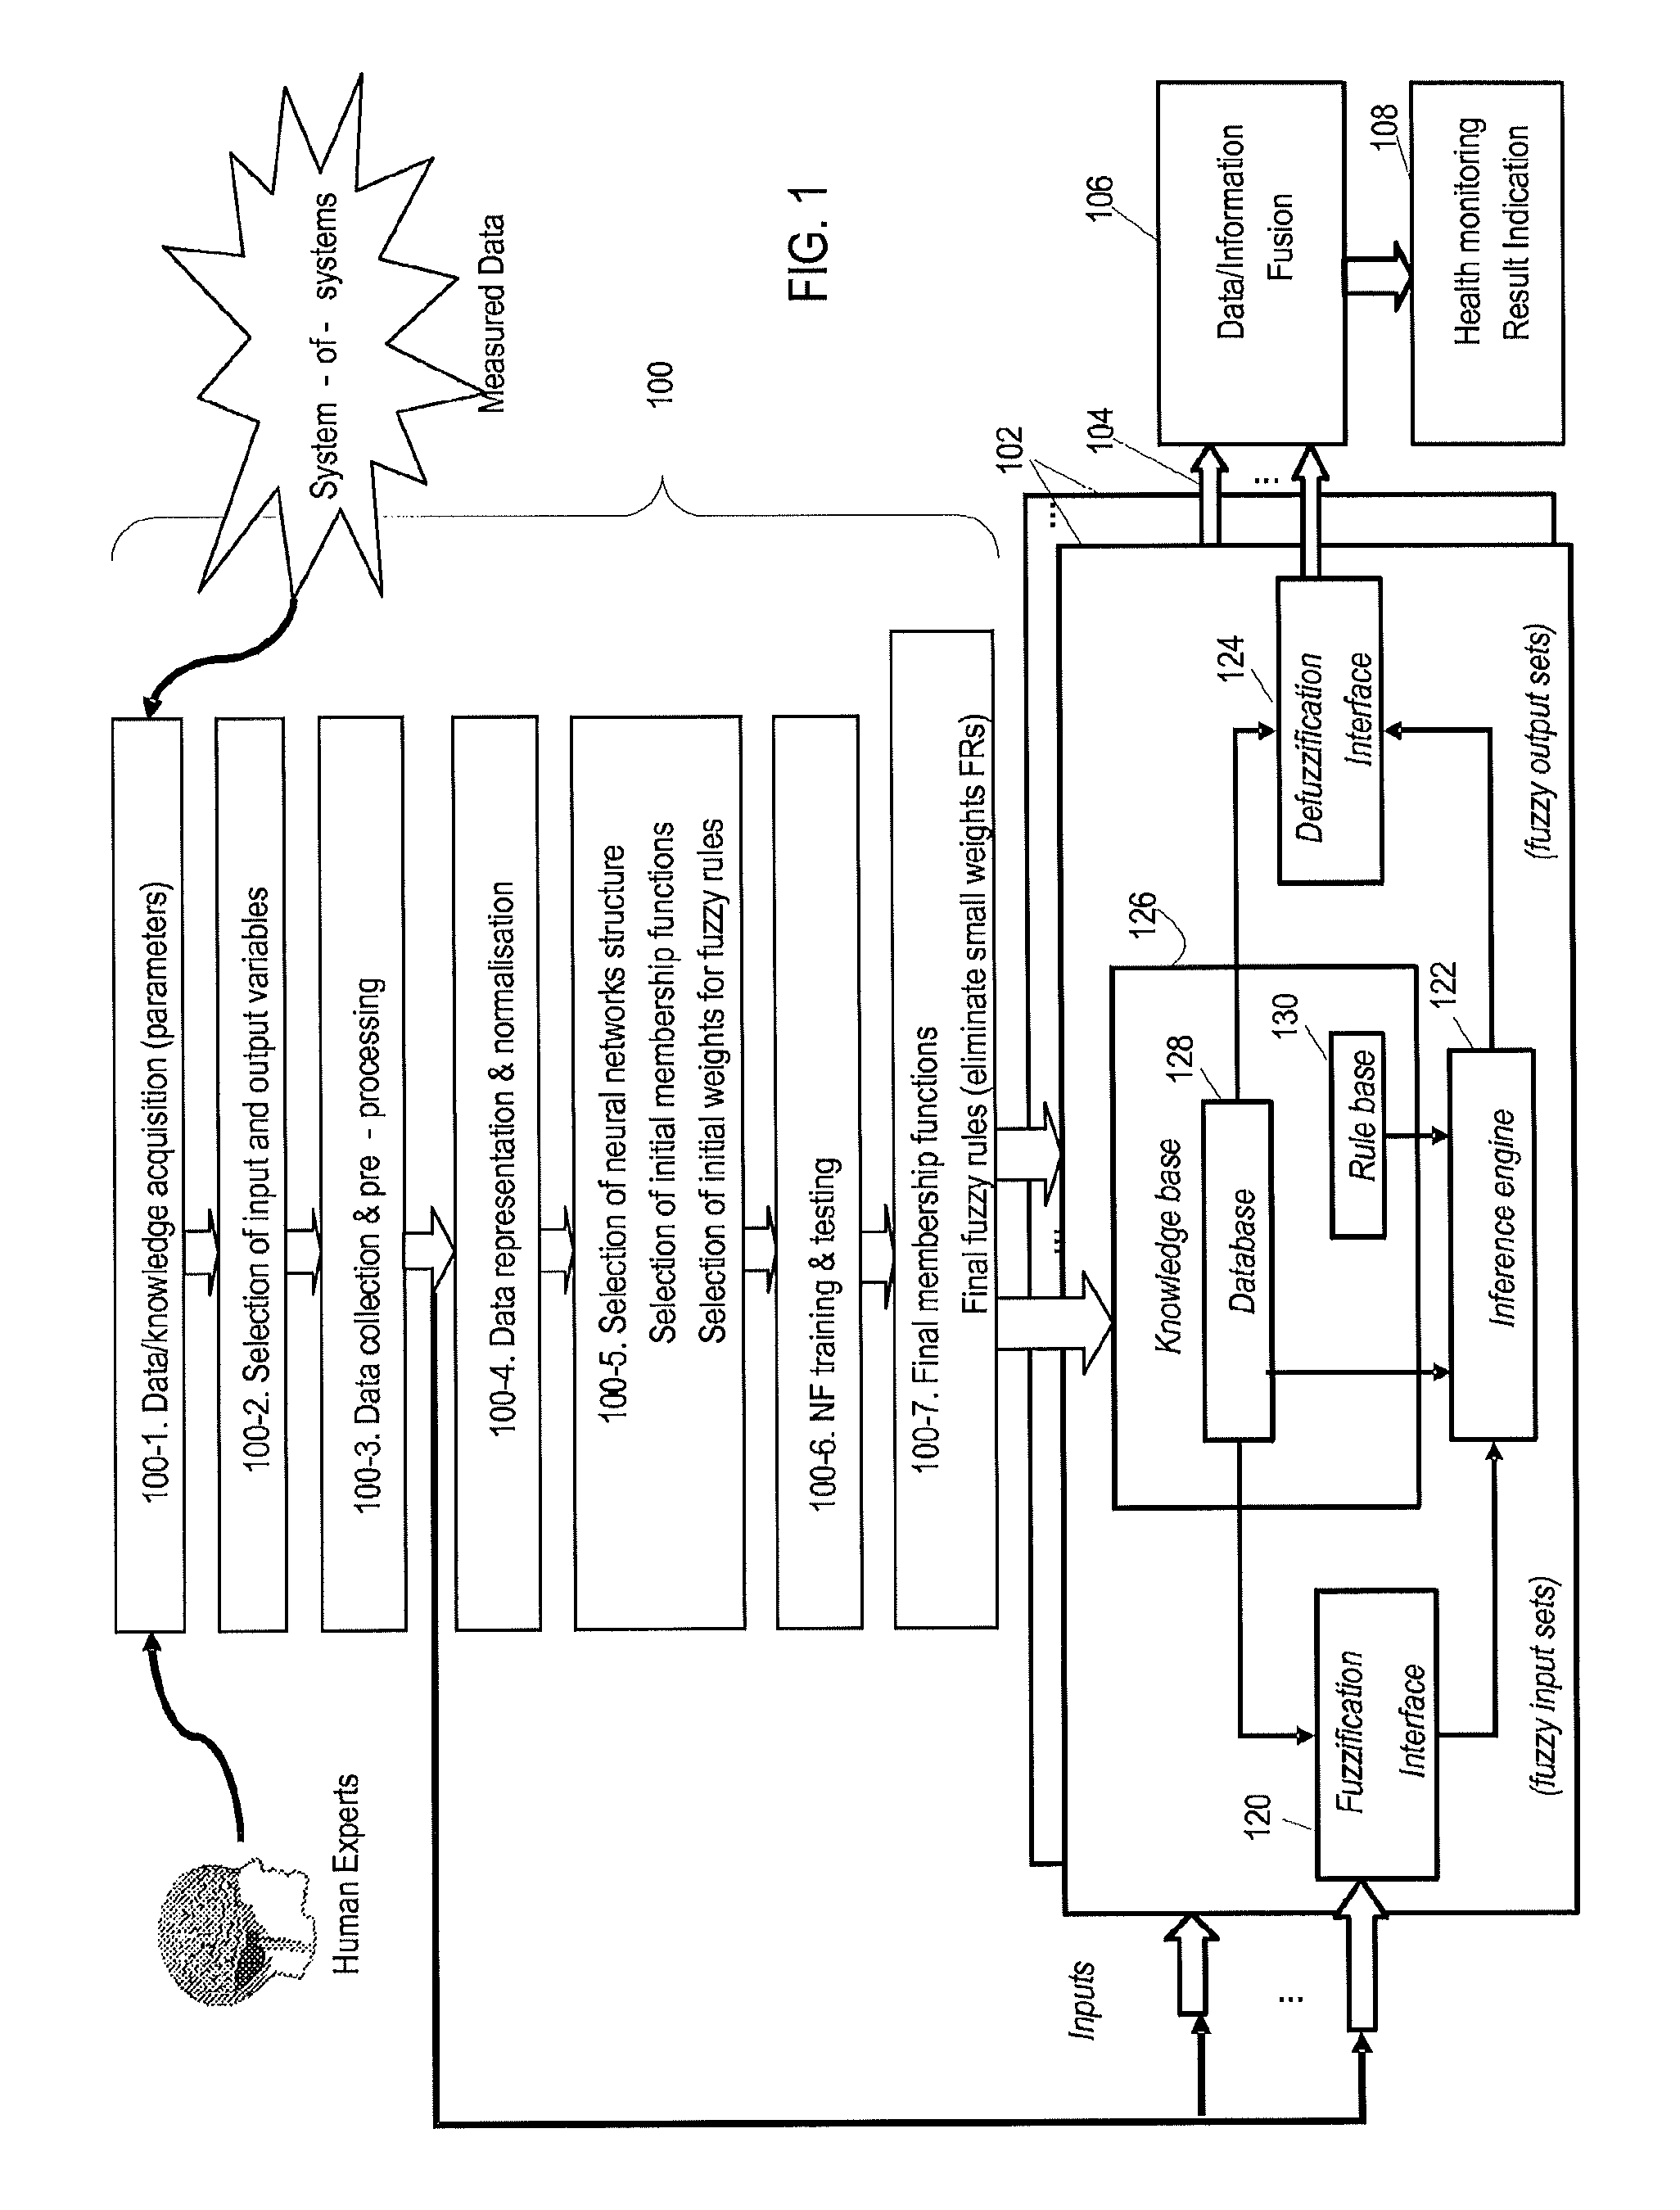 Fuzzy inference methods, and apparatuses, systems and apparatus using such inference apparatus